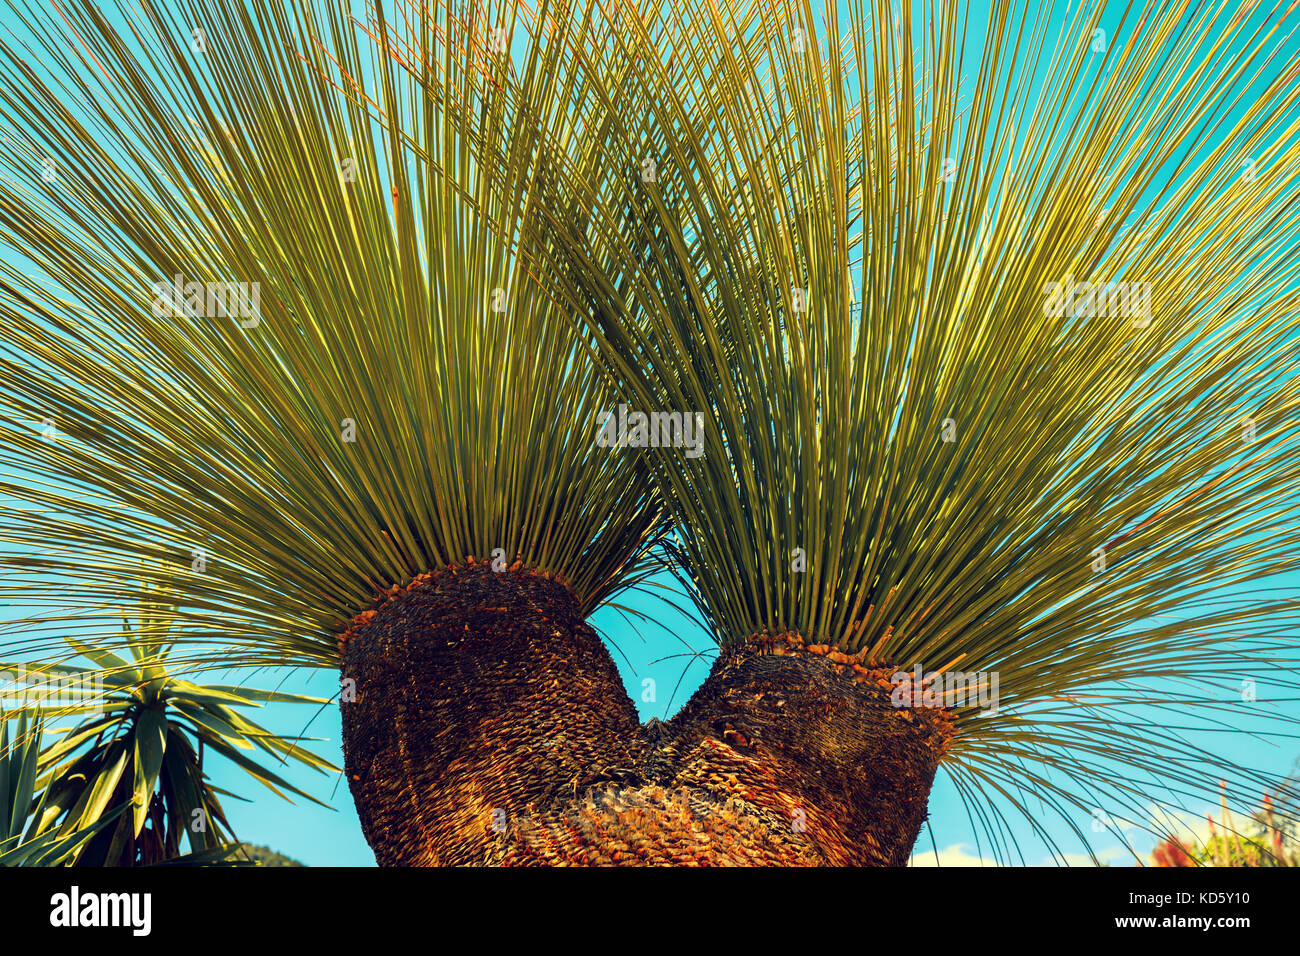 Tropical palm tree leaves against blue sky background Stock Photo